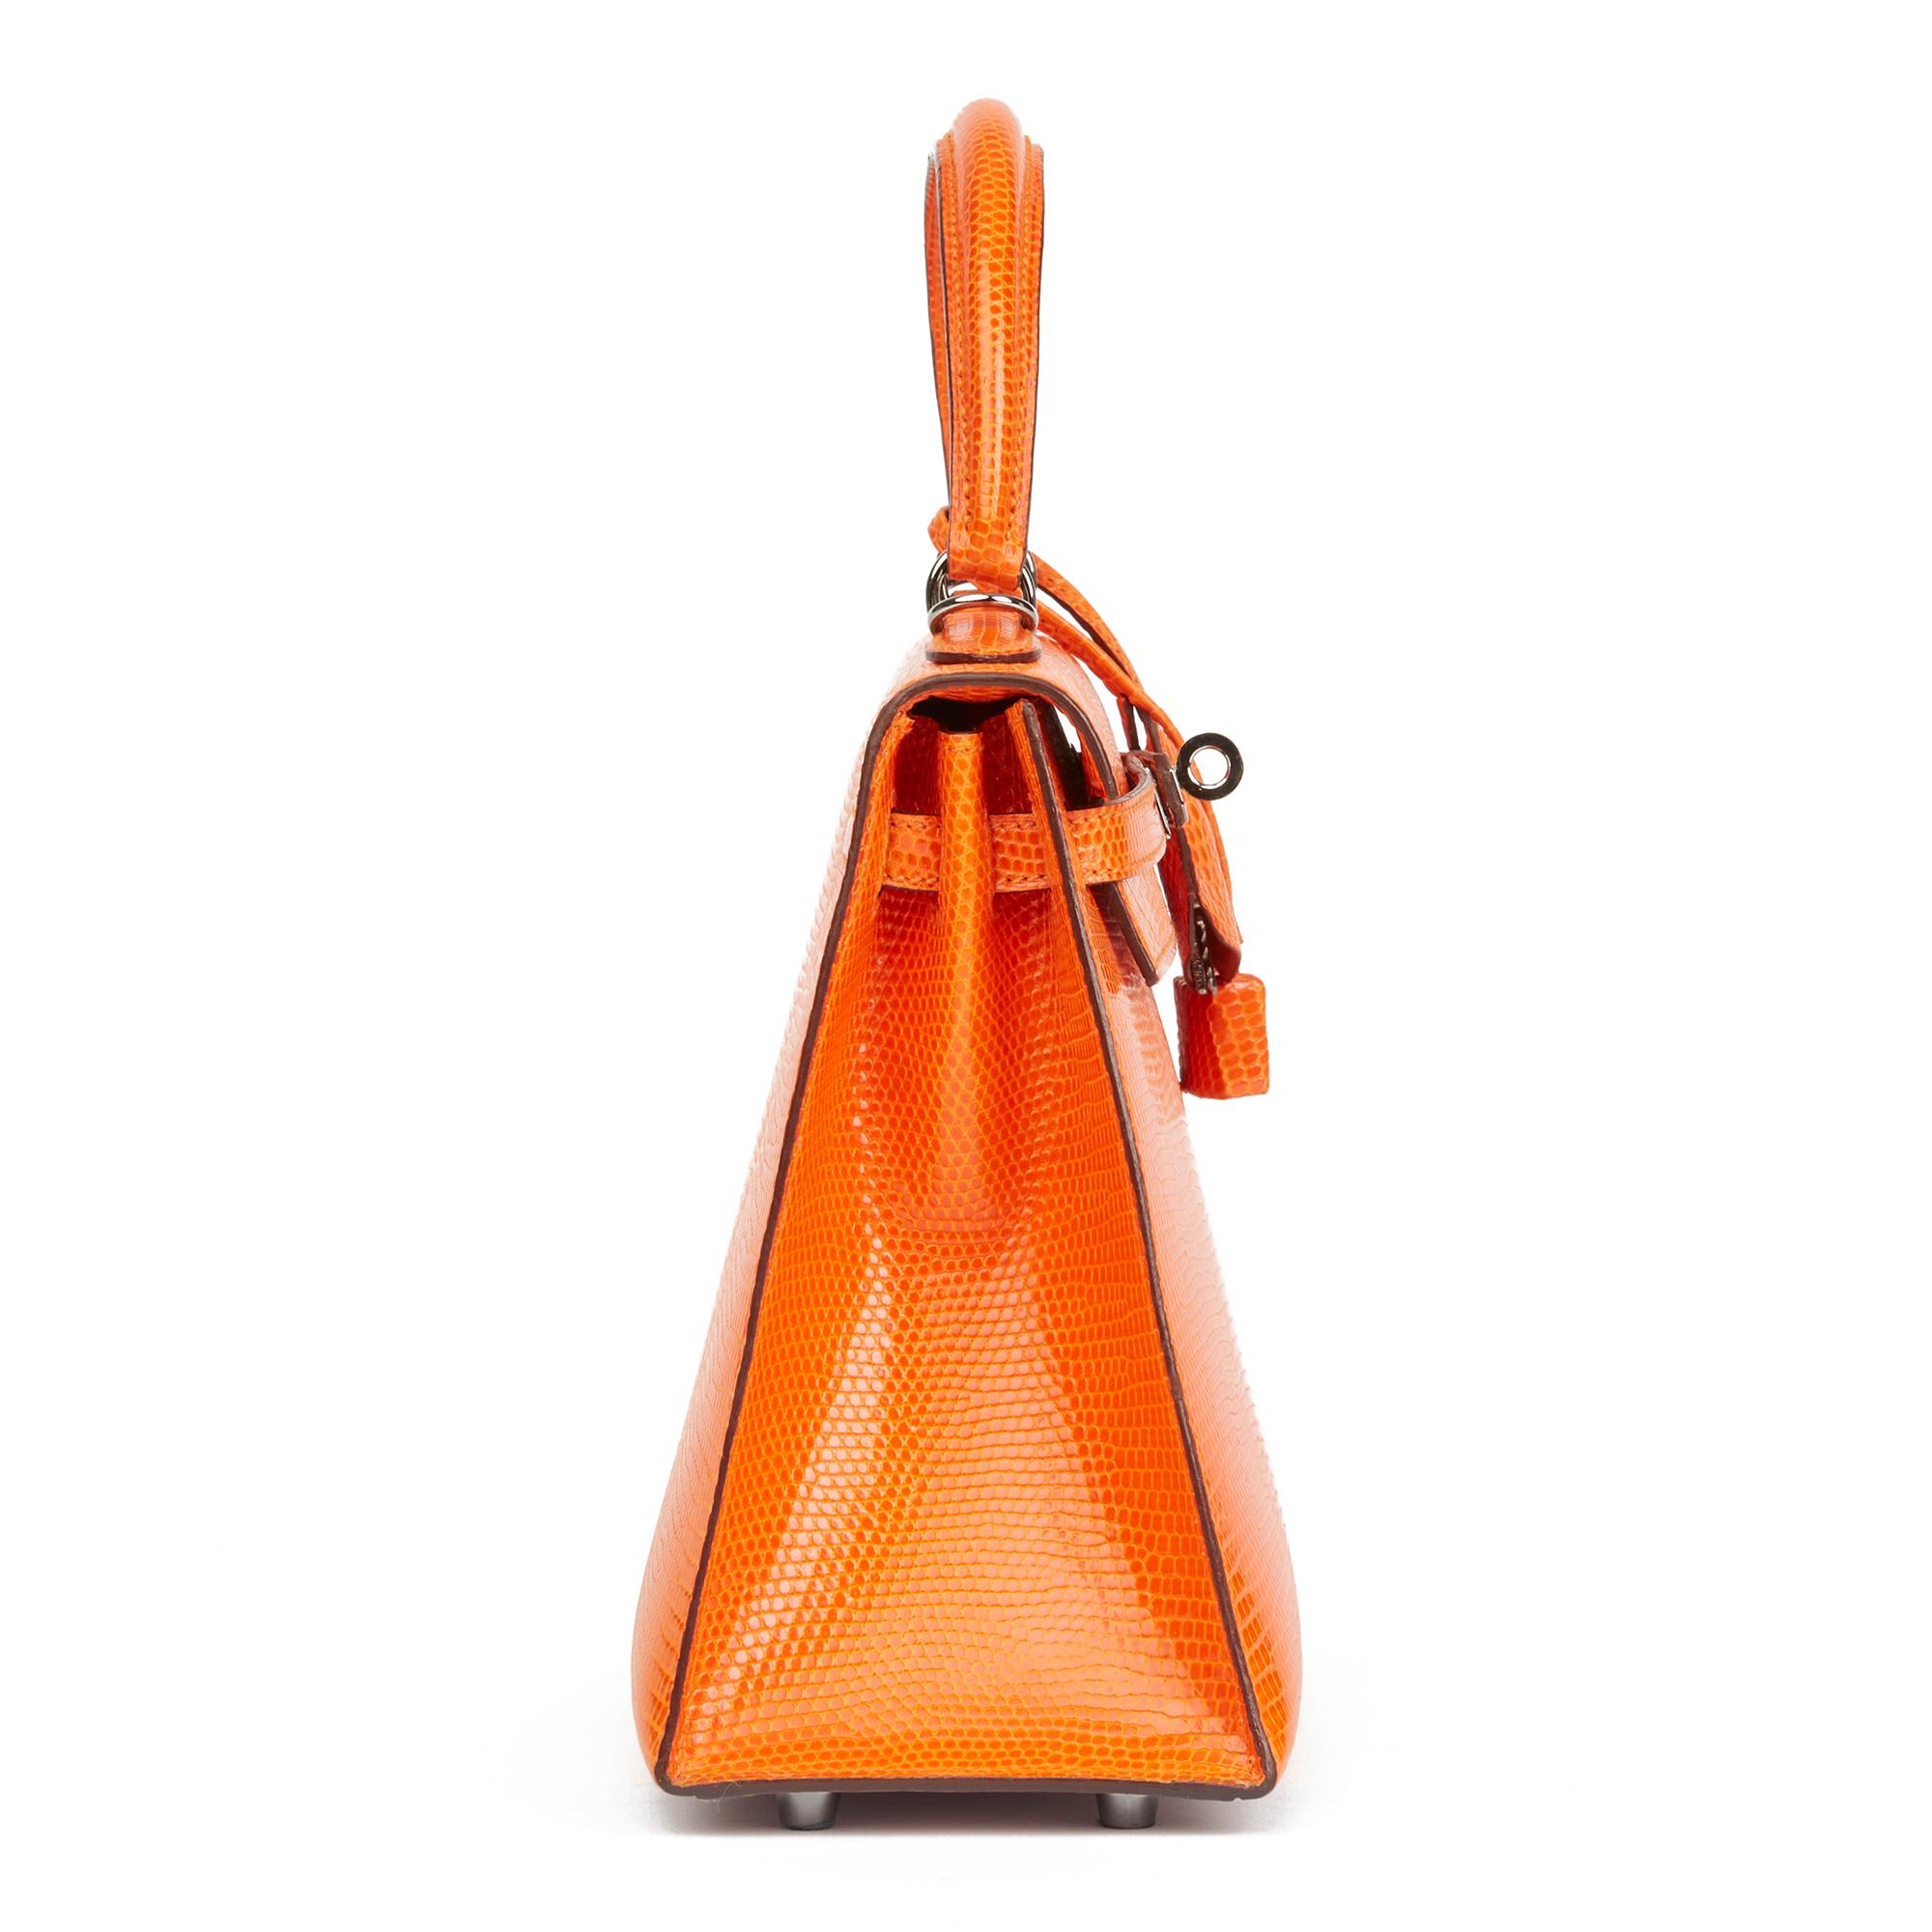 HERMÈS
Tangerine Shiny Niloticus Lizard Leather Kelly 25cm Sellier

 Reference: HB2874
Serial Number: [J]
Age (Circa): 2006
Accompanied By: Hermès Dust Bag, Lock, Keys, Clochette, Care Booklet, Shoulder Strap
Authenticity Details: Date Stamp (Made